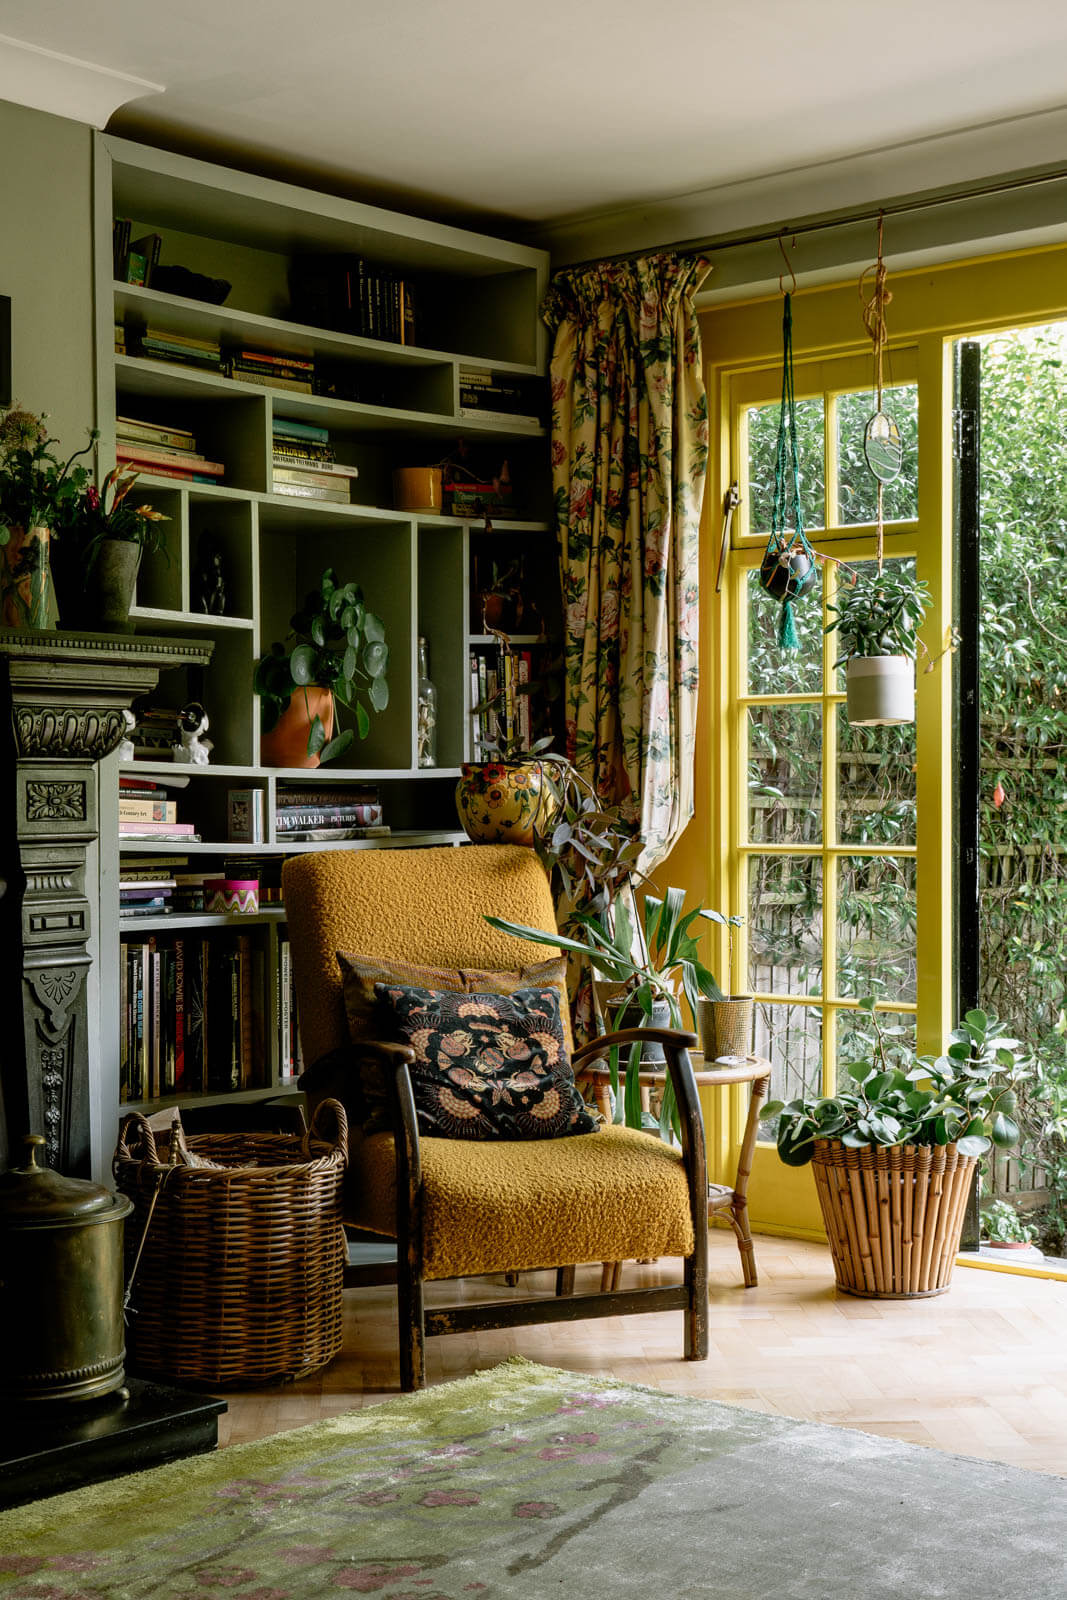 A London Home with Color Accents and a Secret Garden Shed